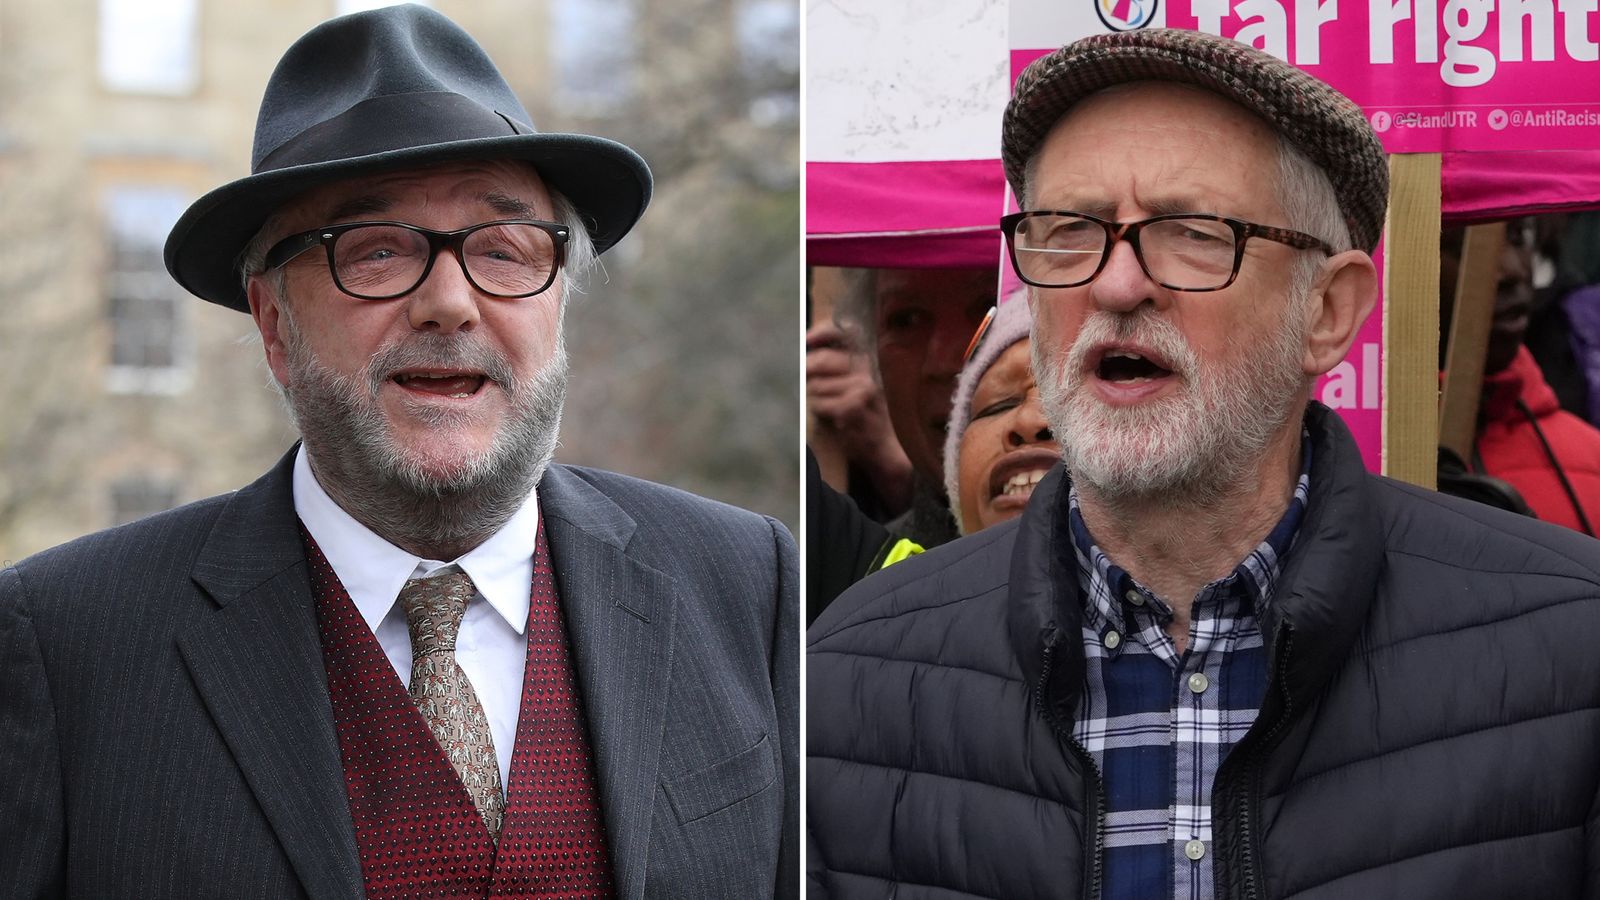 'Complete non-starter': Jeremy Corbyn allies snub George Galloway's plea for political pact with ex-Labour leader